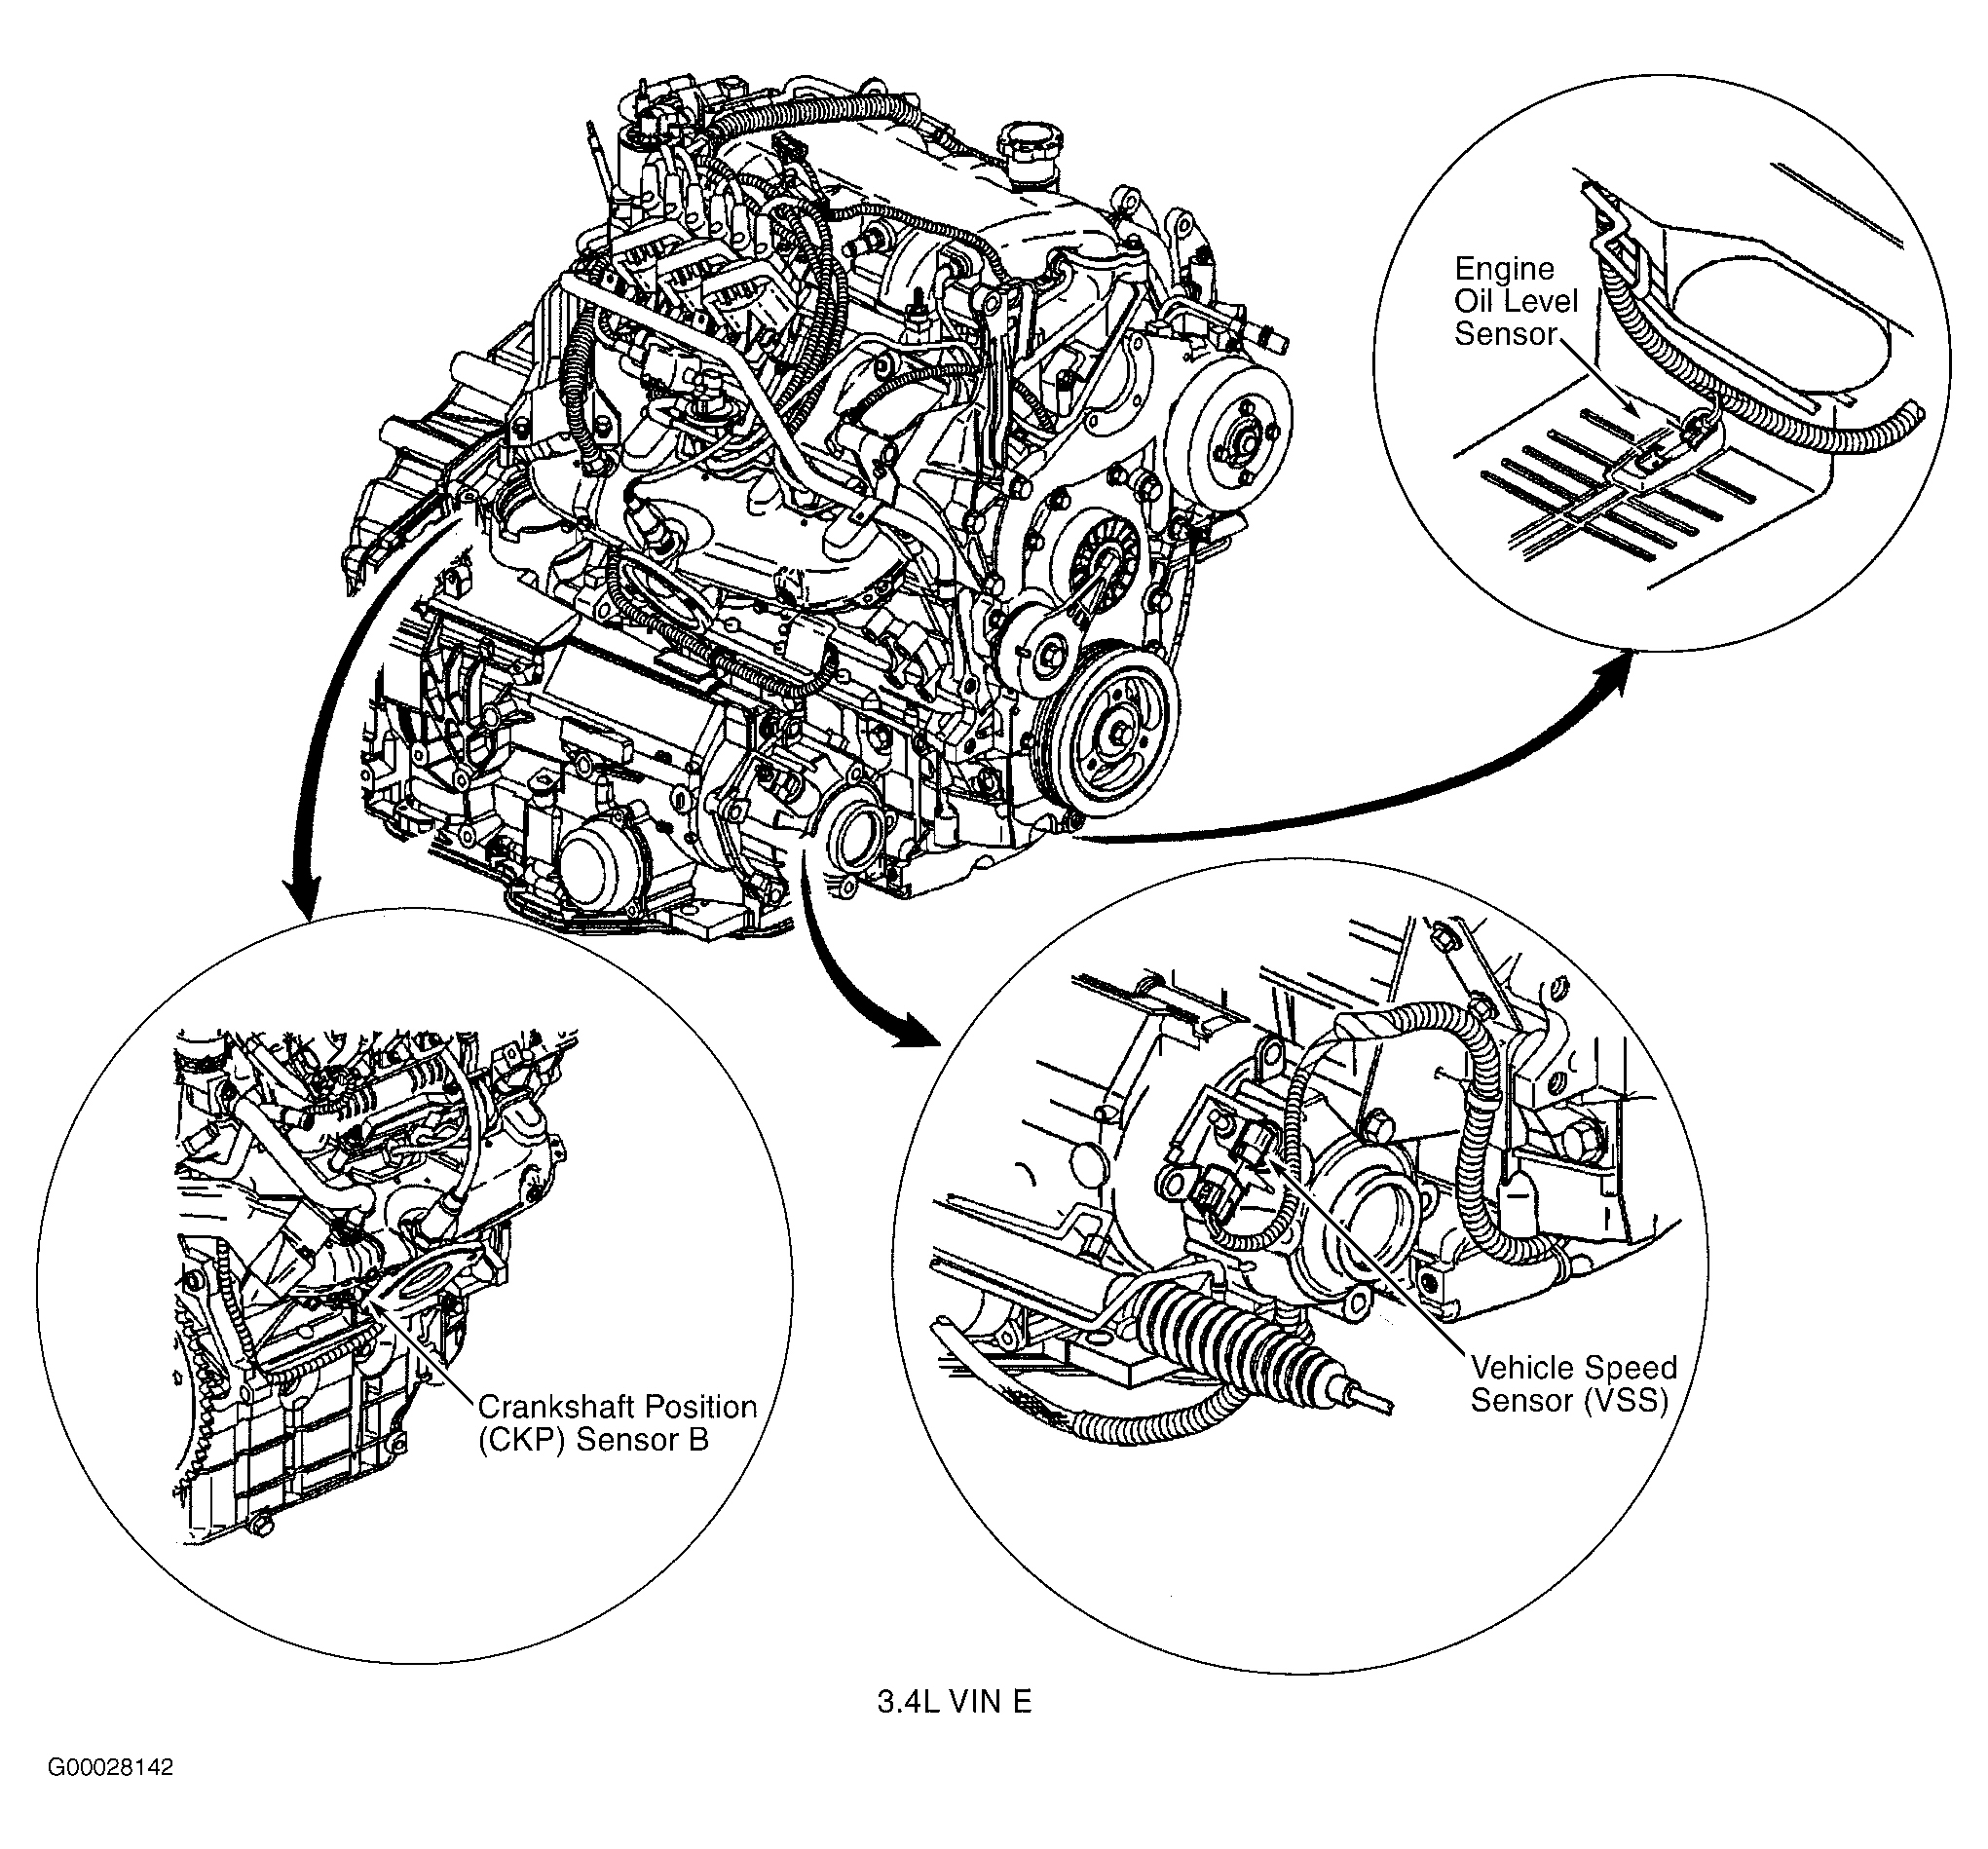 Chevrolet Impala 2003 - Component Locations -  Right Side Of Engine (3.4L VIN E)